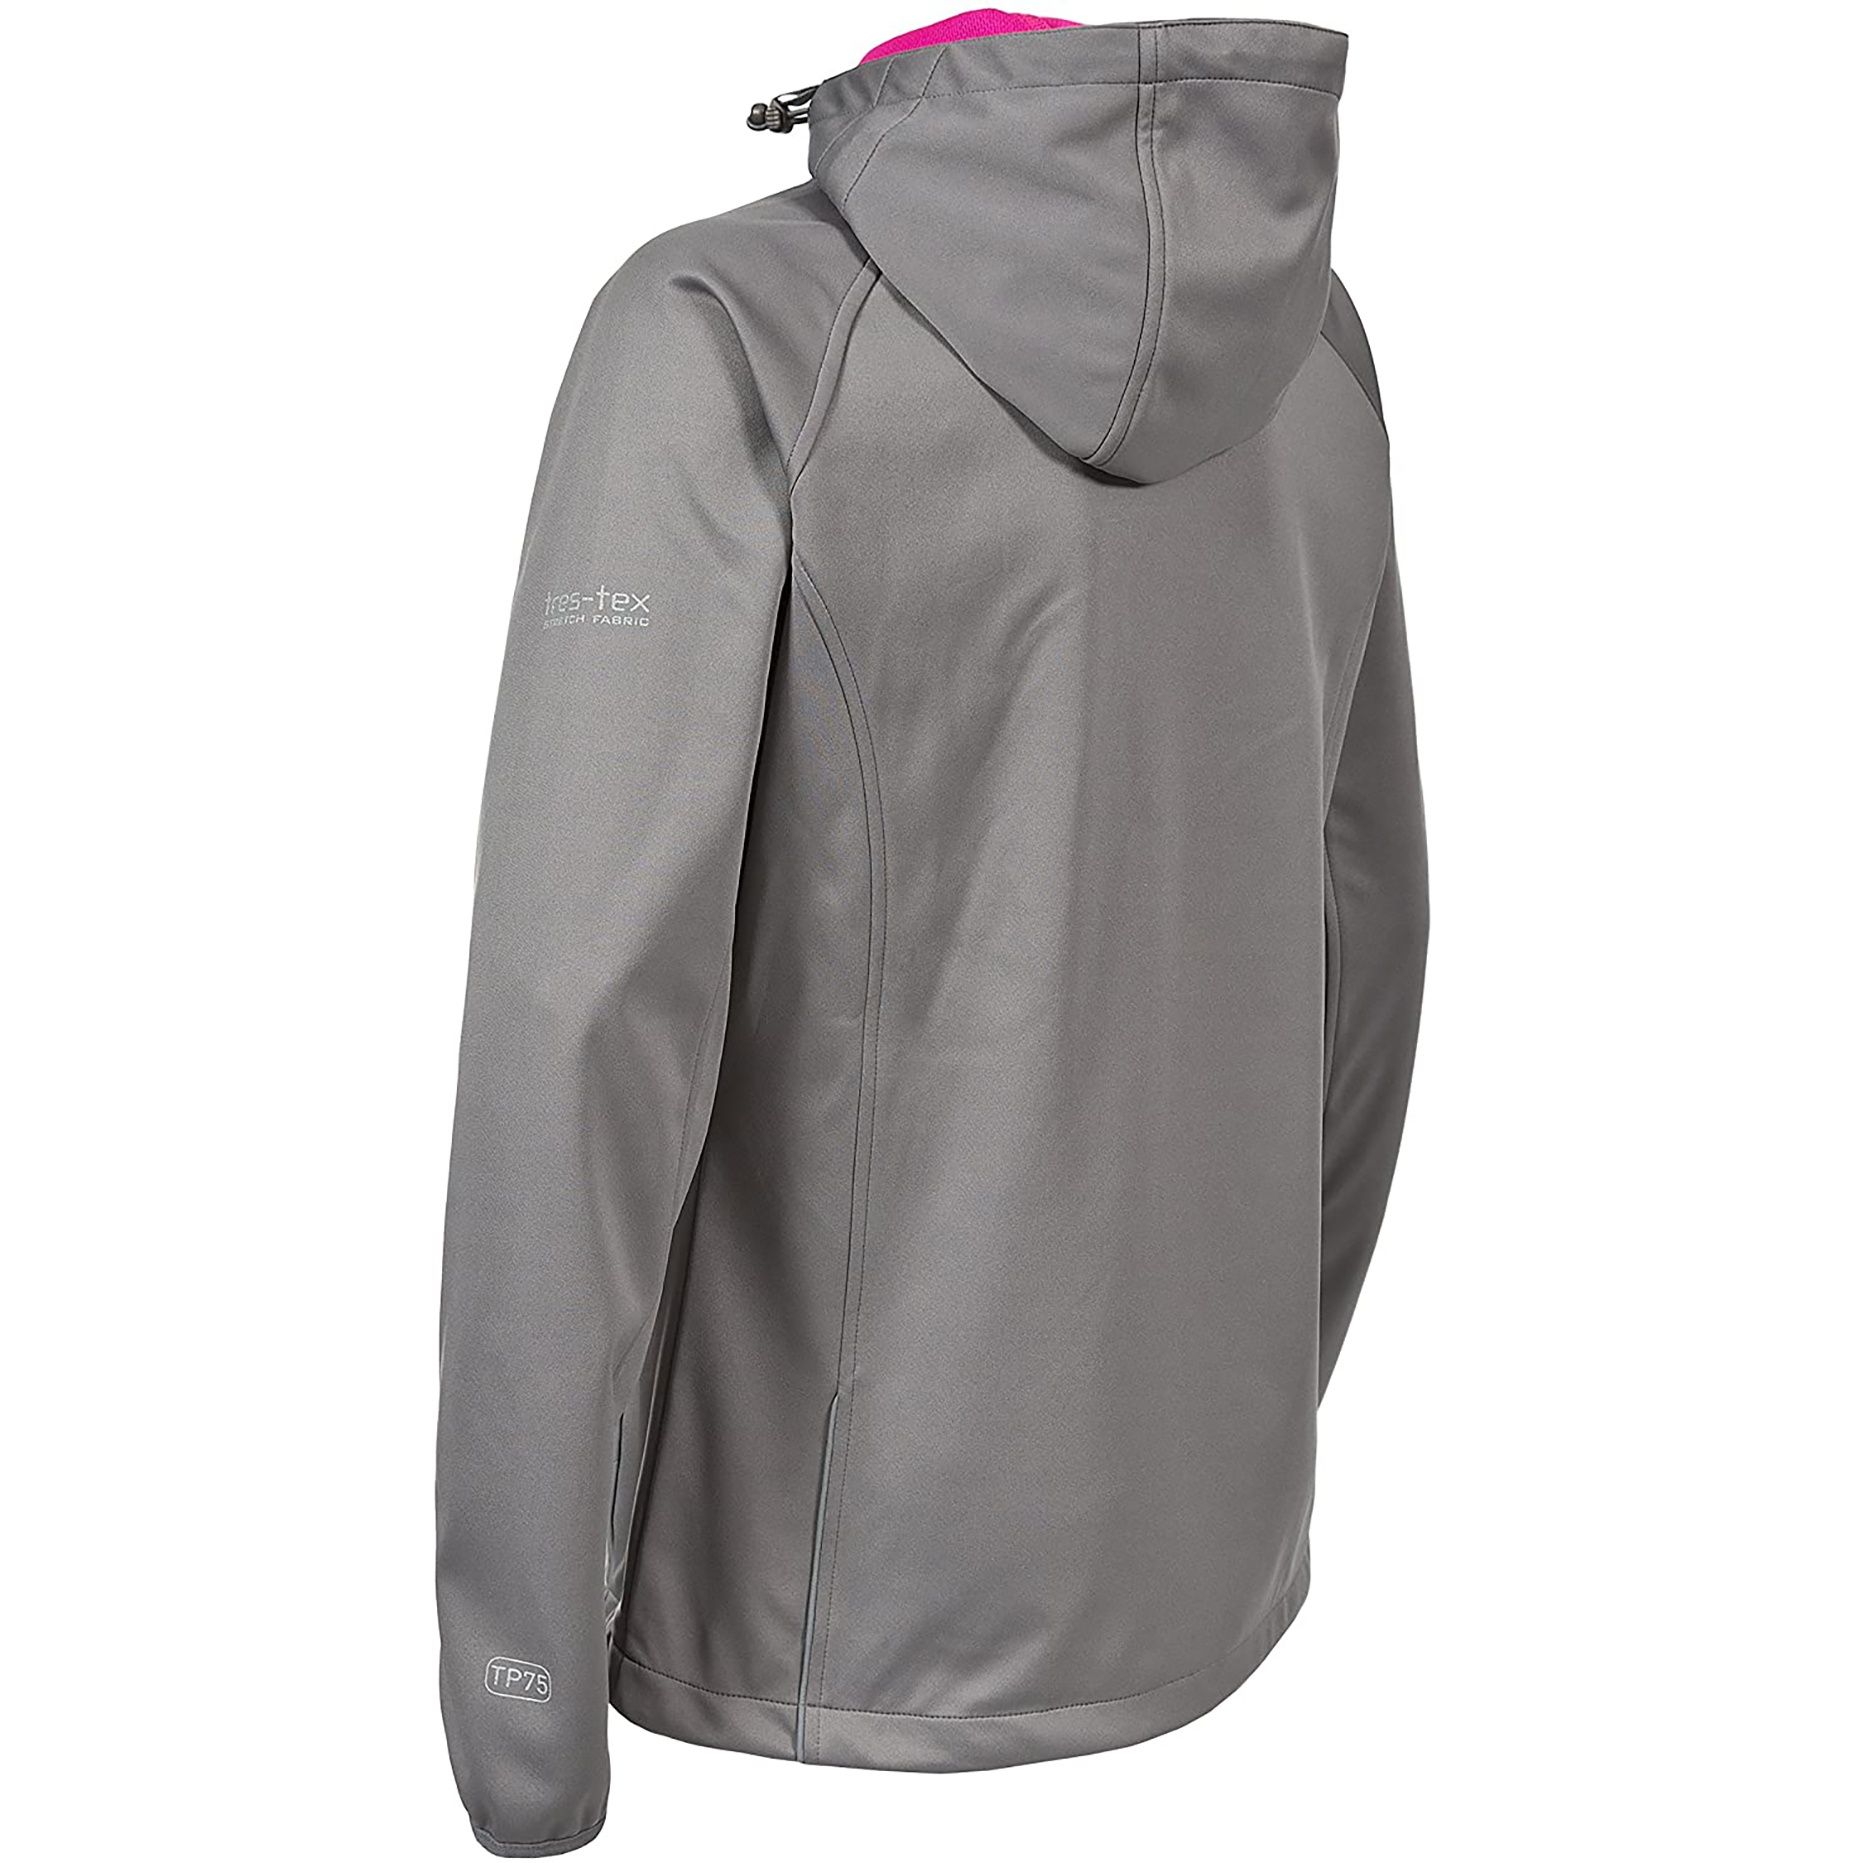 Waterproof 5000mm, breathable 5000mvp. Adjustable grown-on hood. 2 zip pockets. Drawcord at hem. Chin guard. Binding at cuff. Reflective piping and print. Contrast fabric backing. 100% polyester TPU membrane. Trespass Womens Chest Sizing (approx): XS/8 - 32in/81cm, S/10 - 34in/86cm, M/12 - 36in/91.4cm, L/14 - 38in/96.5cm, XL/16 - 40in/101.5cm, XXL/18 - 42in/106.5cm.